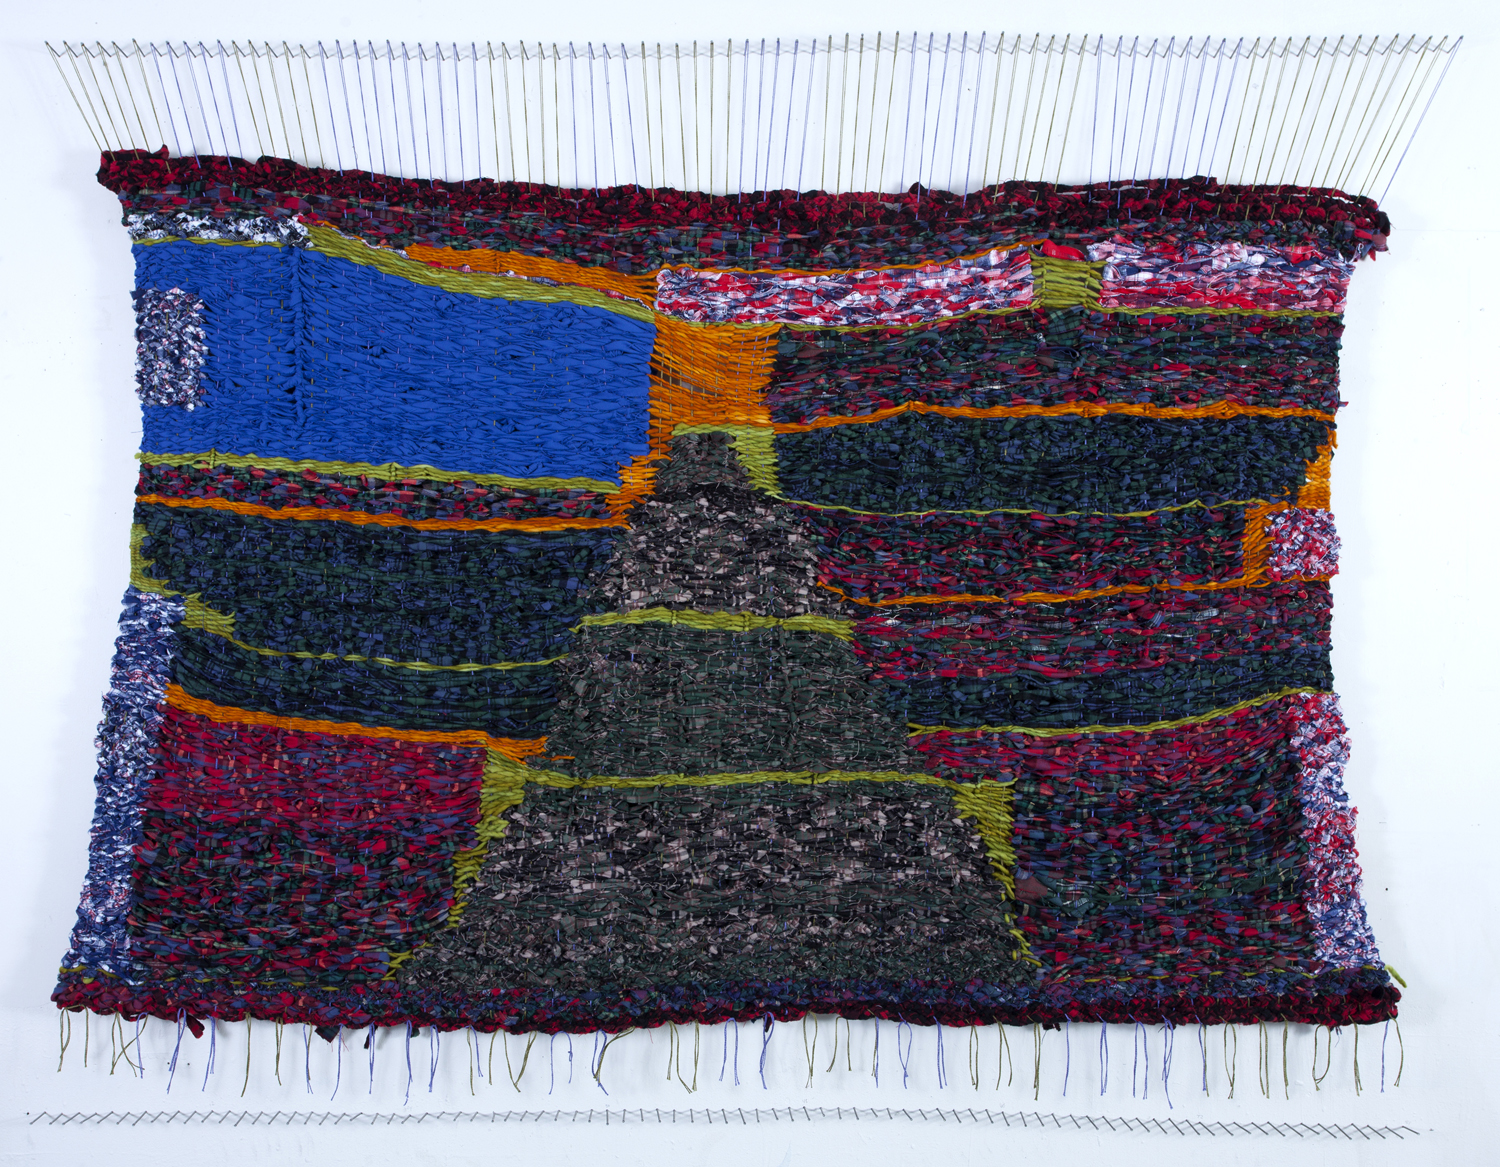  Stacey Piwinski,  Passage to the Sky , Flannel remnants, yarn and string, 47x76 